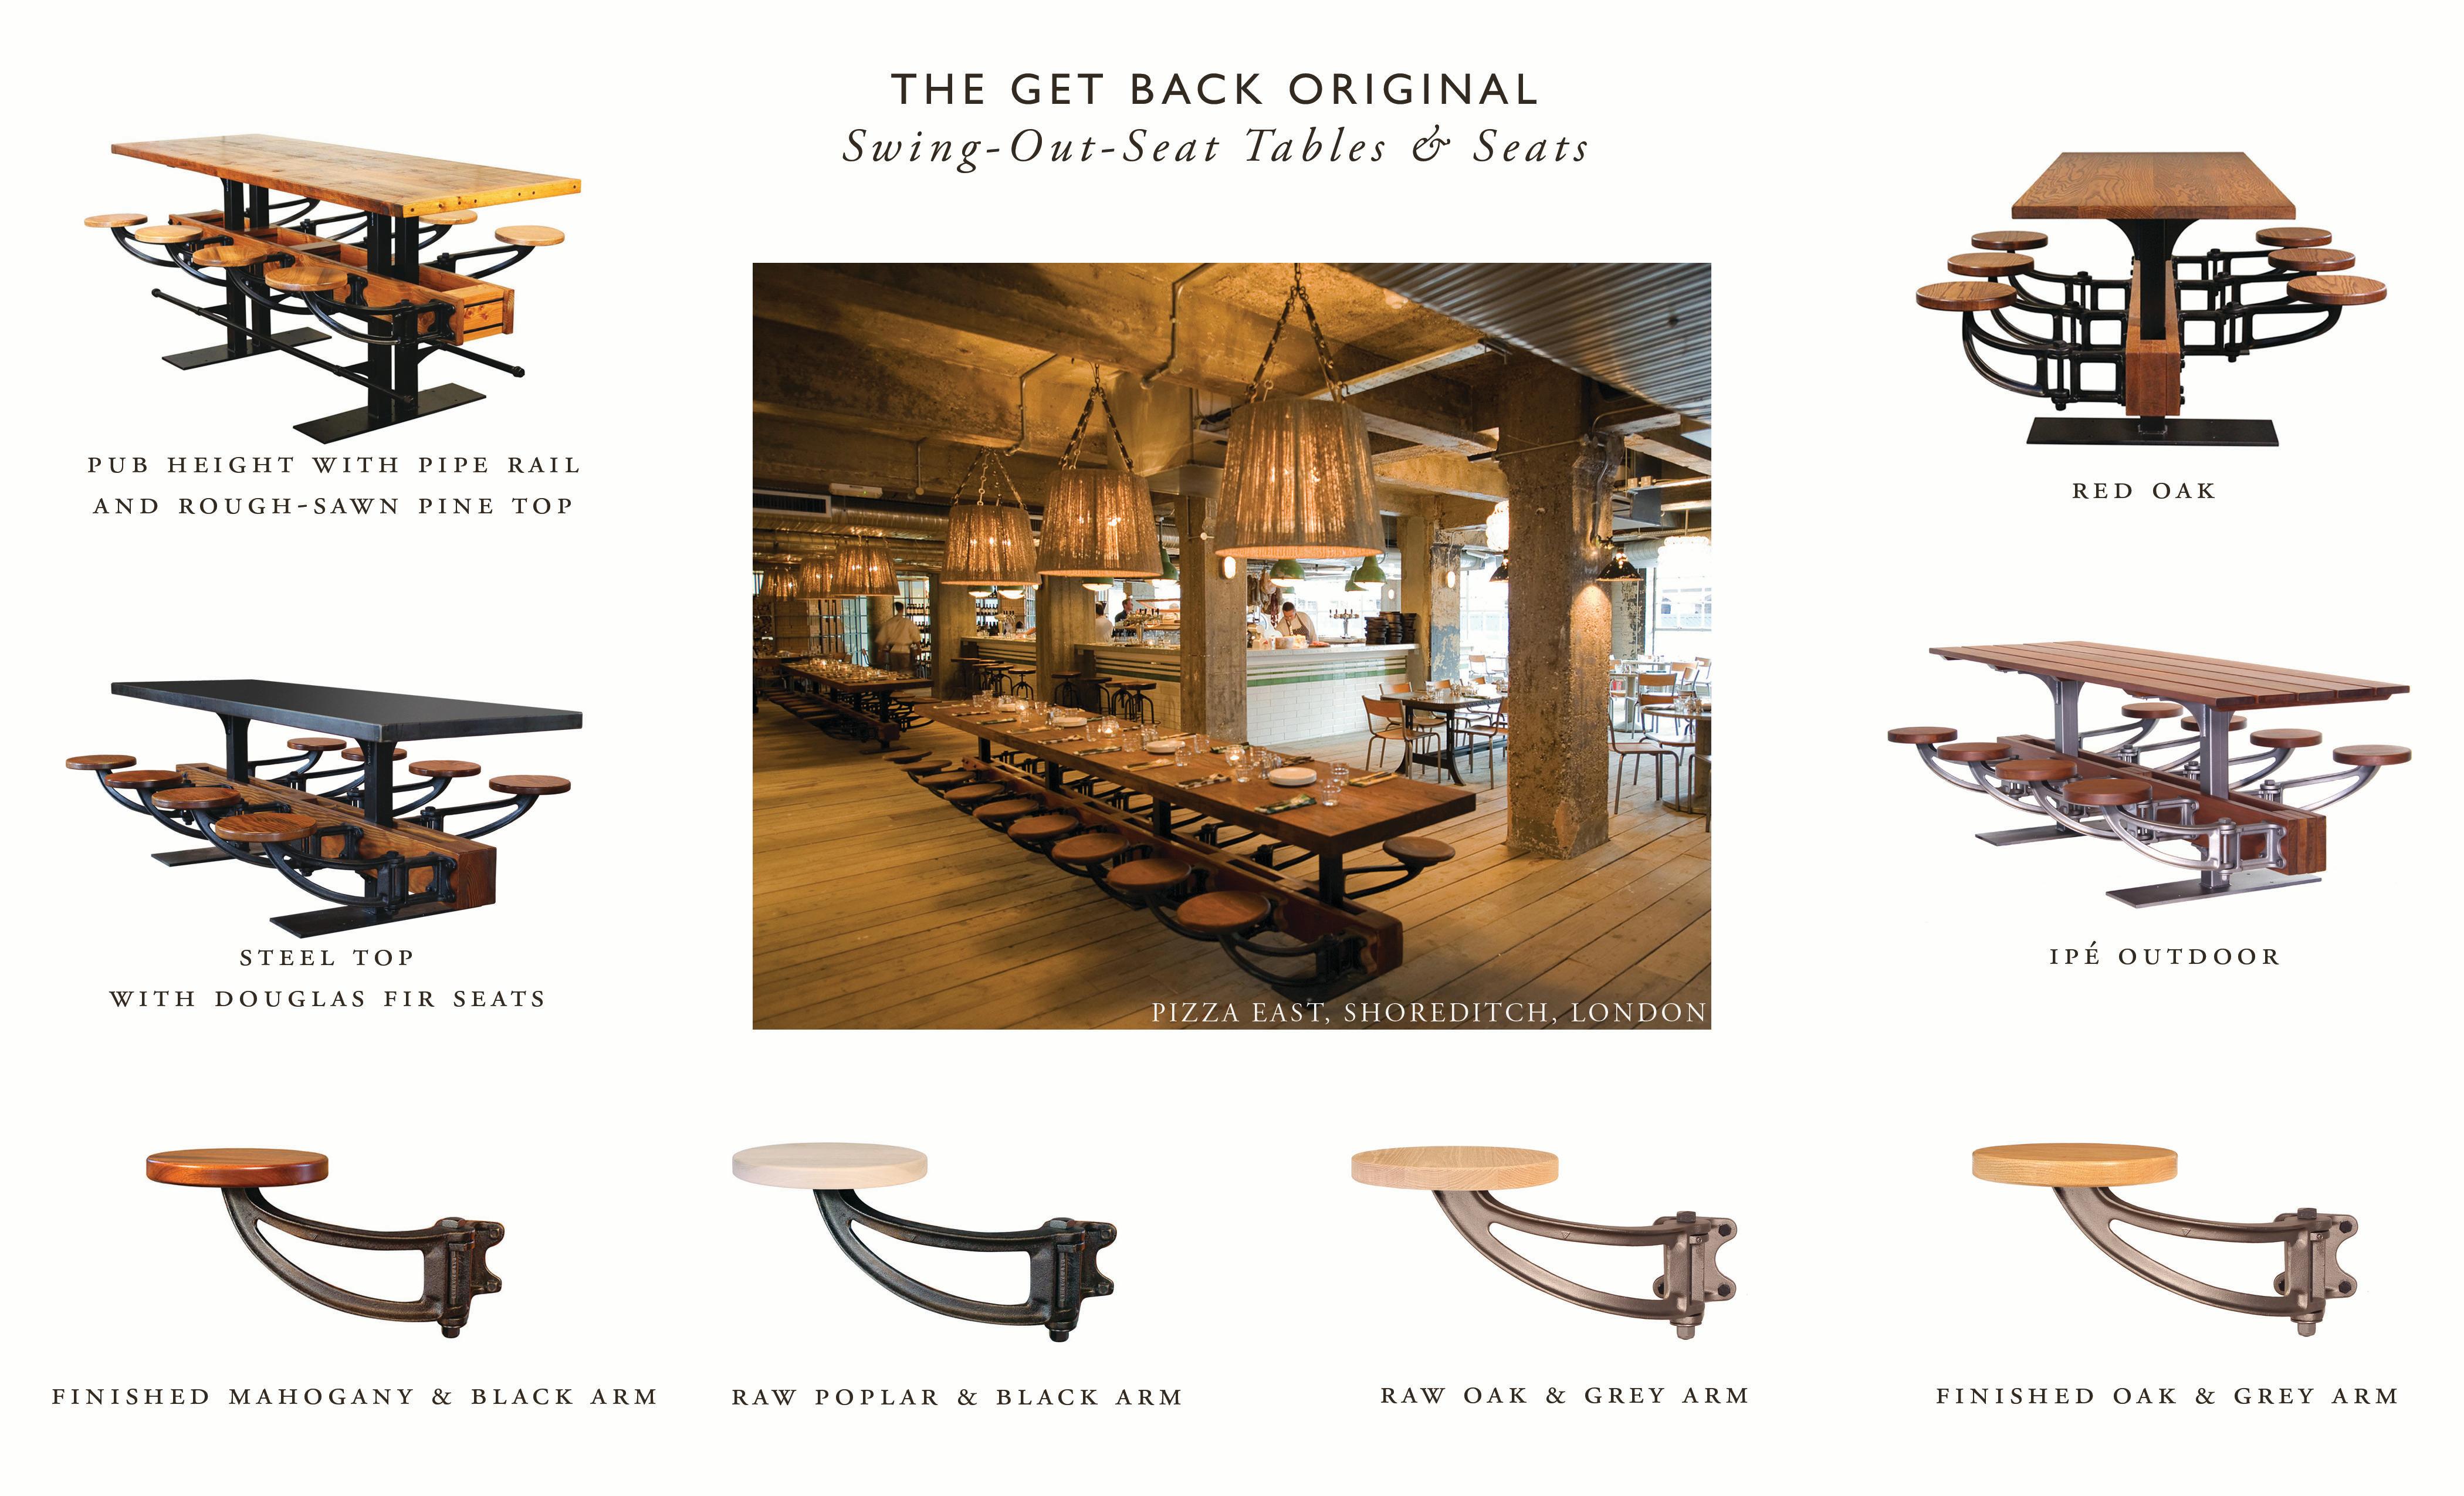 Restaurant / Cafeteria / Conference / Communal Industrial style dining table. Built with cast iron swing out seats, steel pedestals, and a steel, glass or wood top, with any number of seats. Can also be built to bar height. When the seats are fully